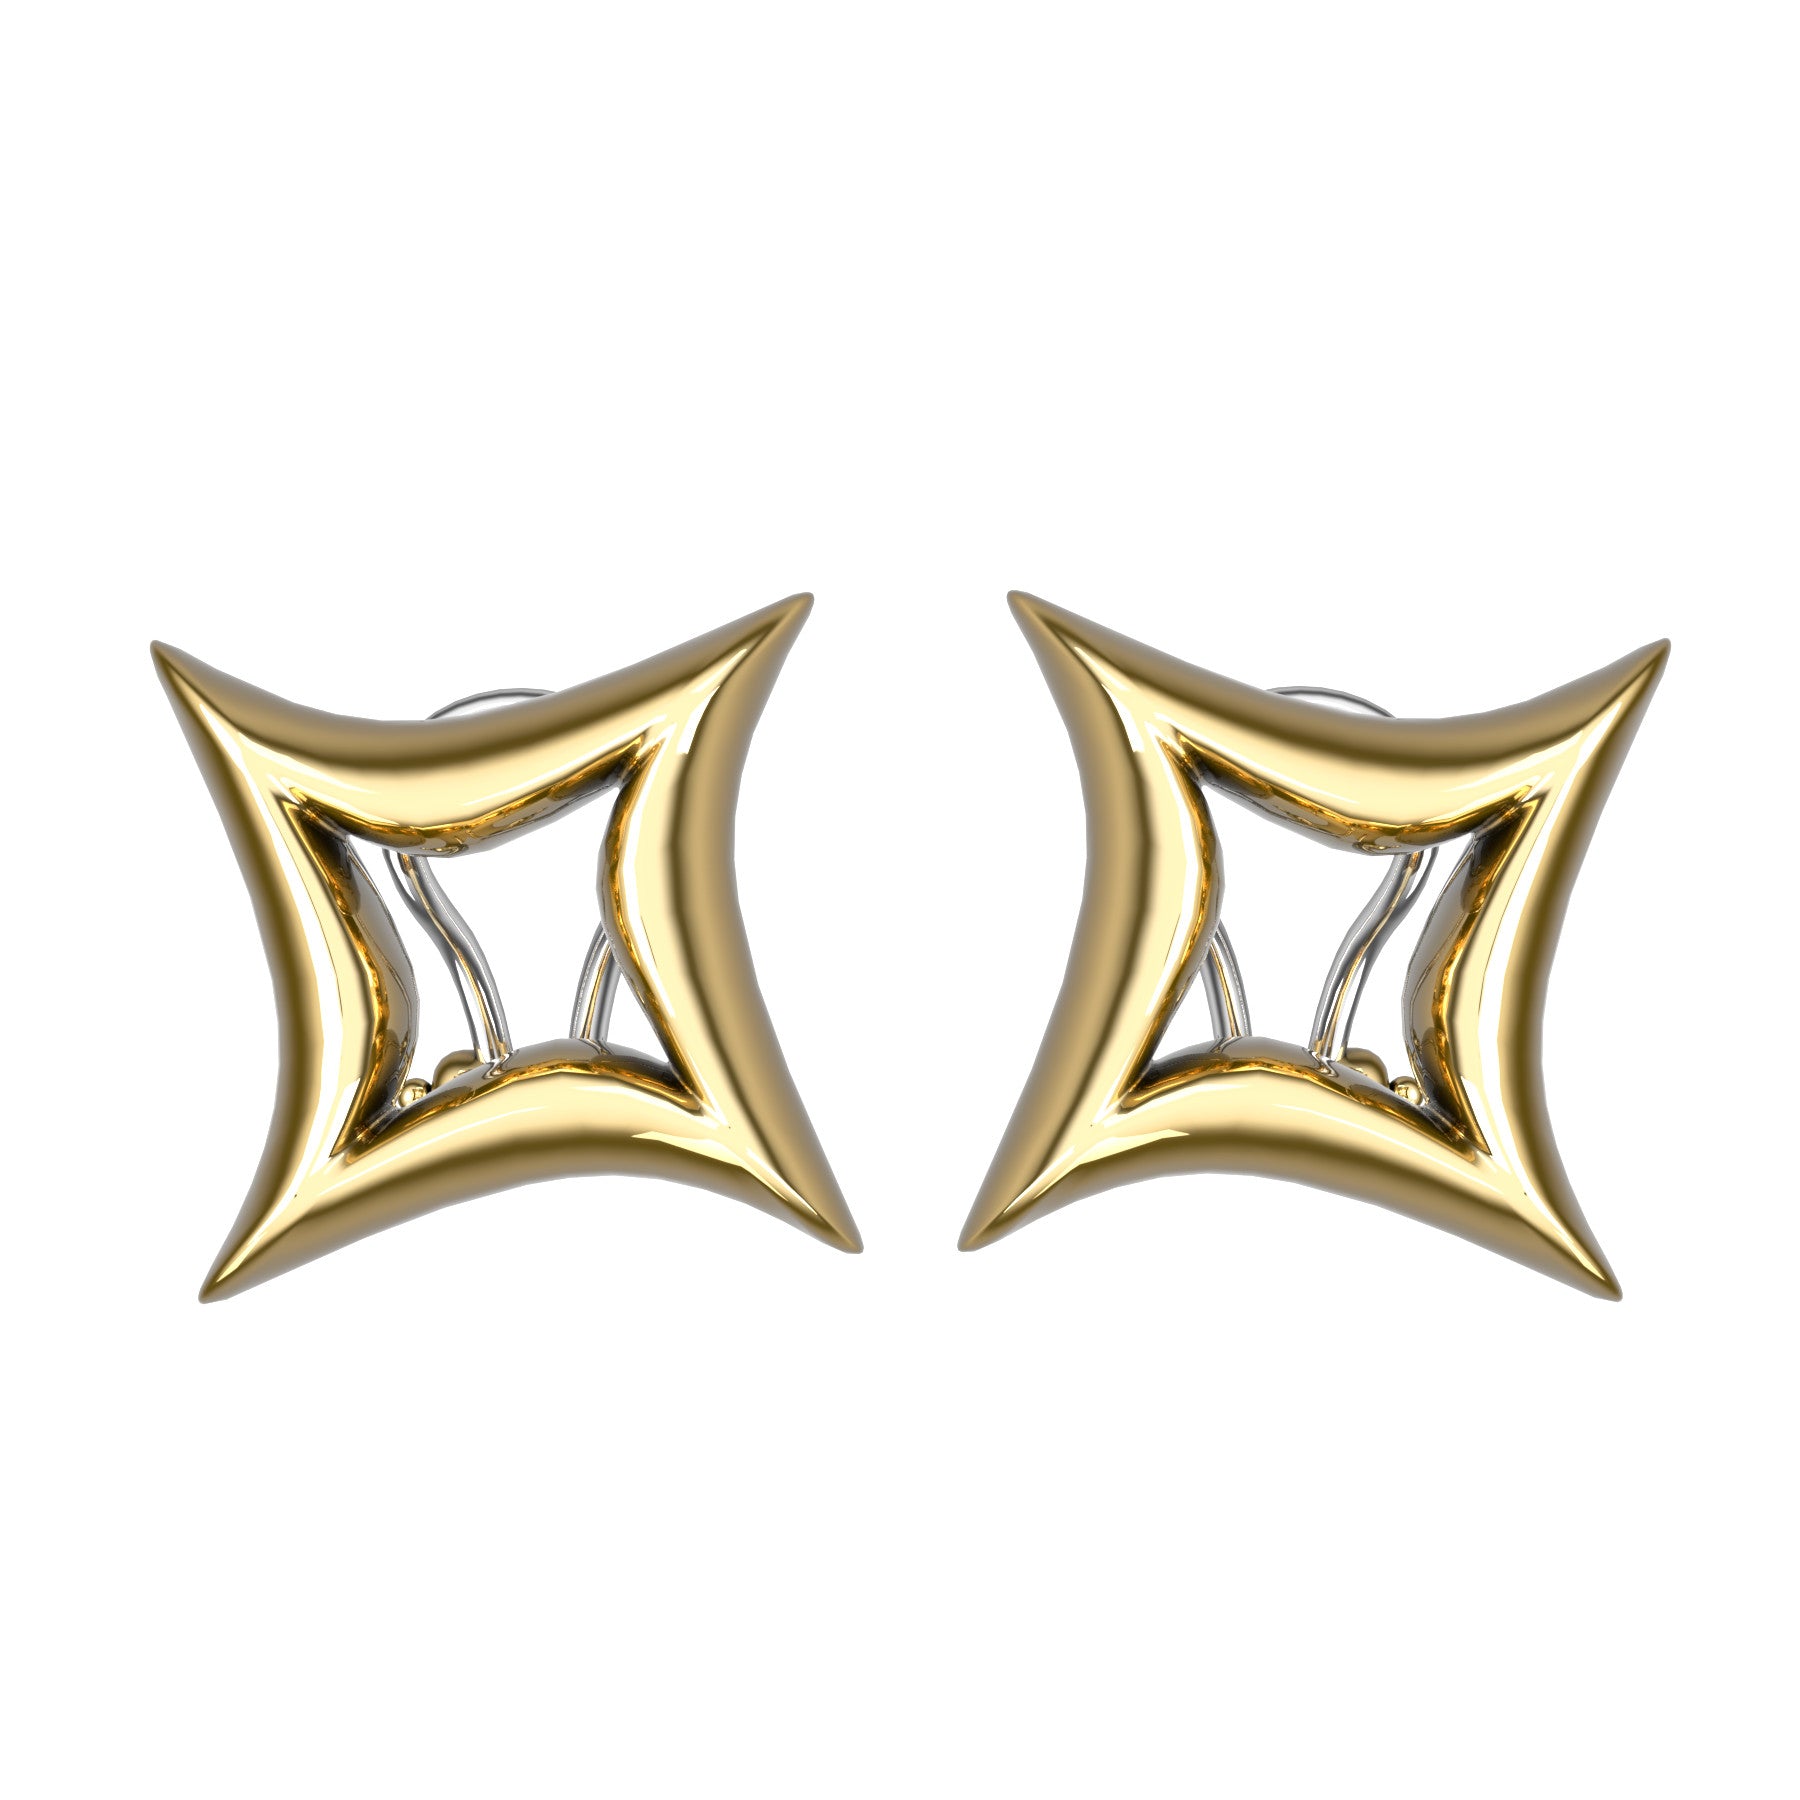 etoiles bizarres earrings, 18 K yellow gold, weight about 10,5 g. (0.37 oz) size 16,6x16,6x4,5 mm